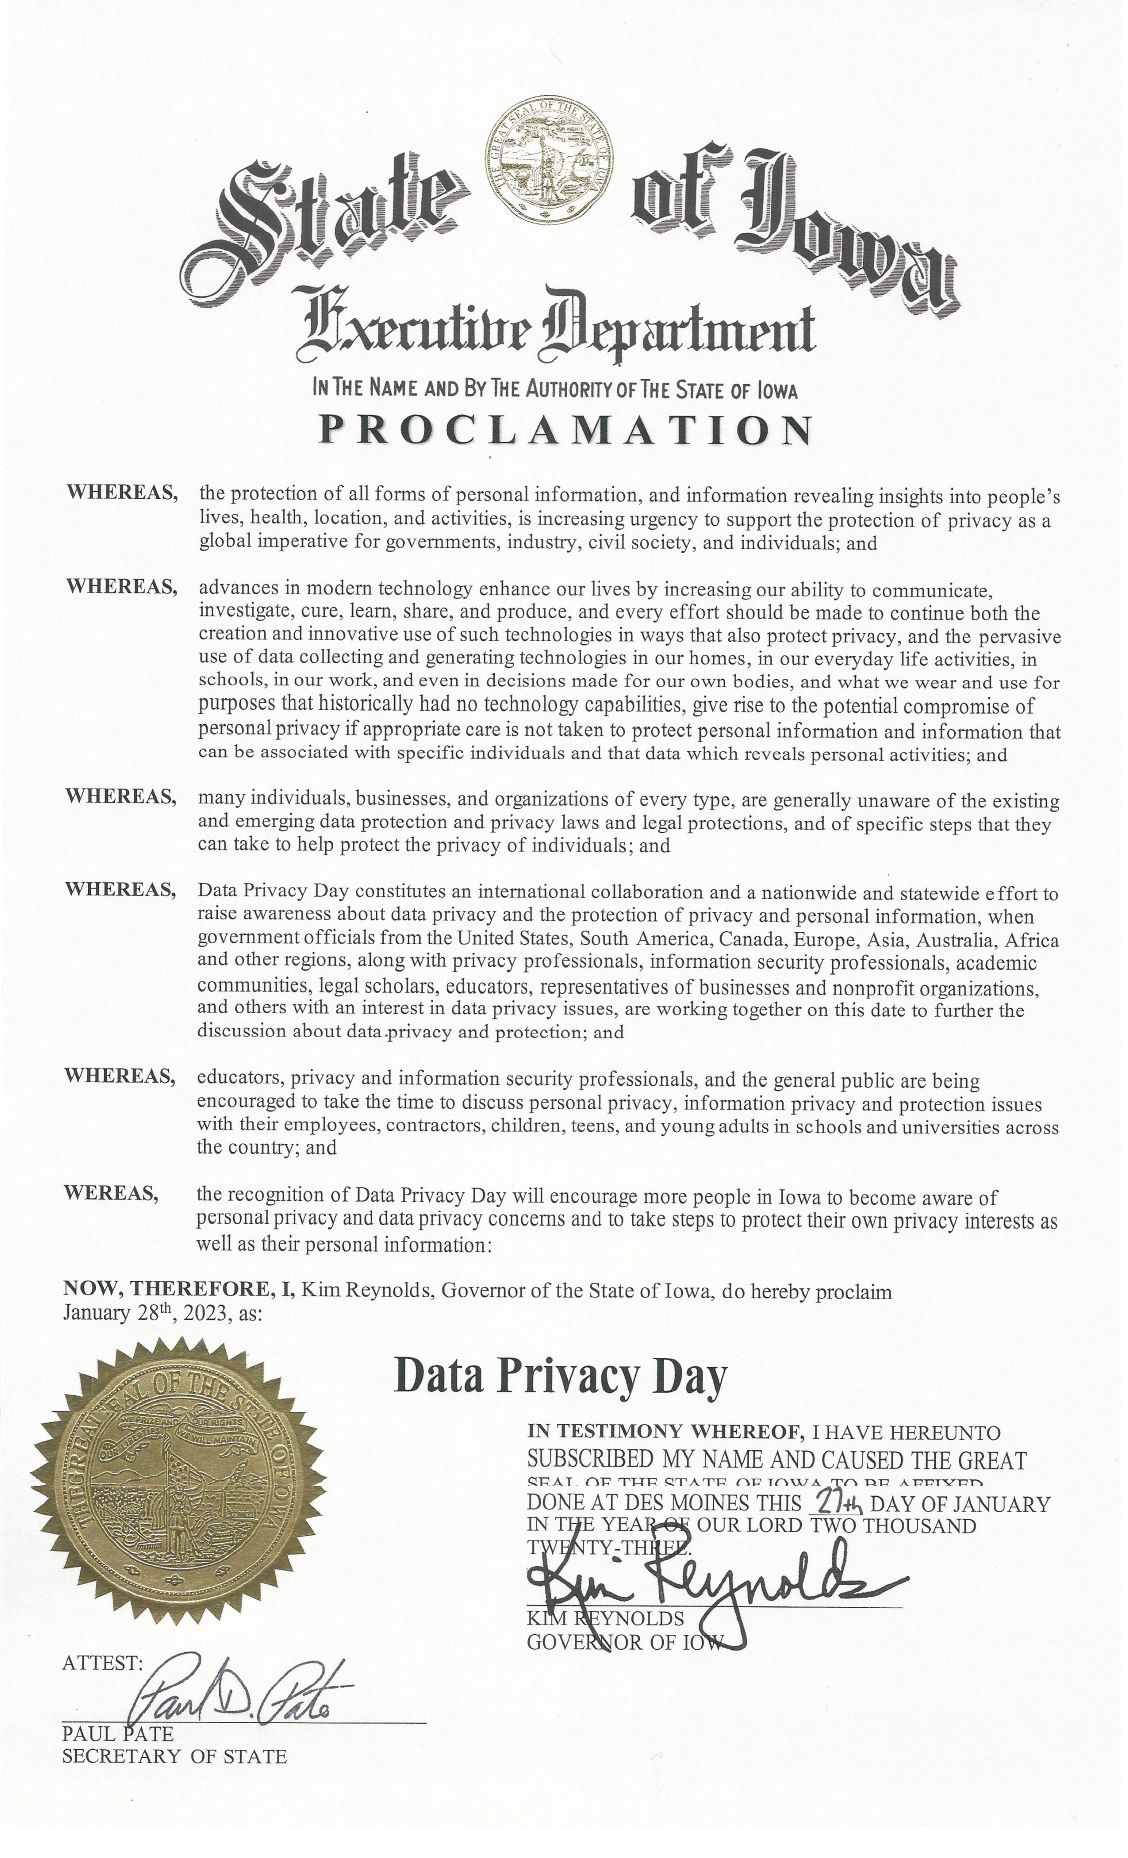 Data Privacy Day Proclamation